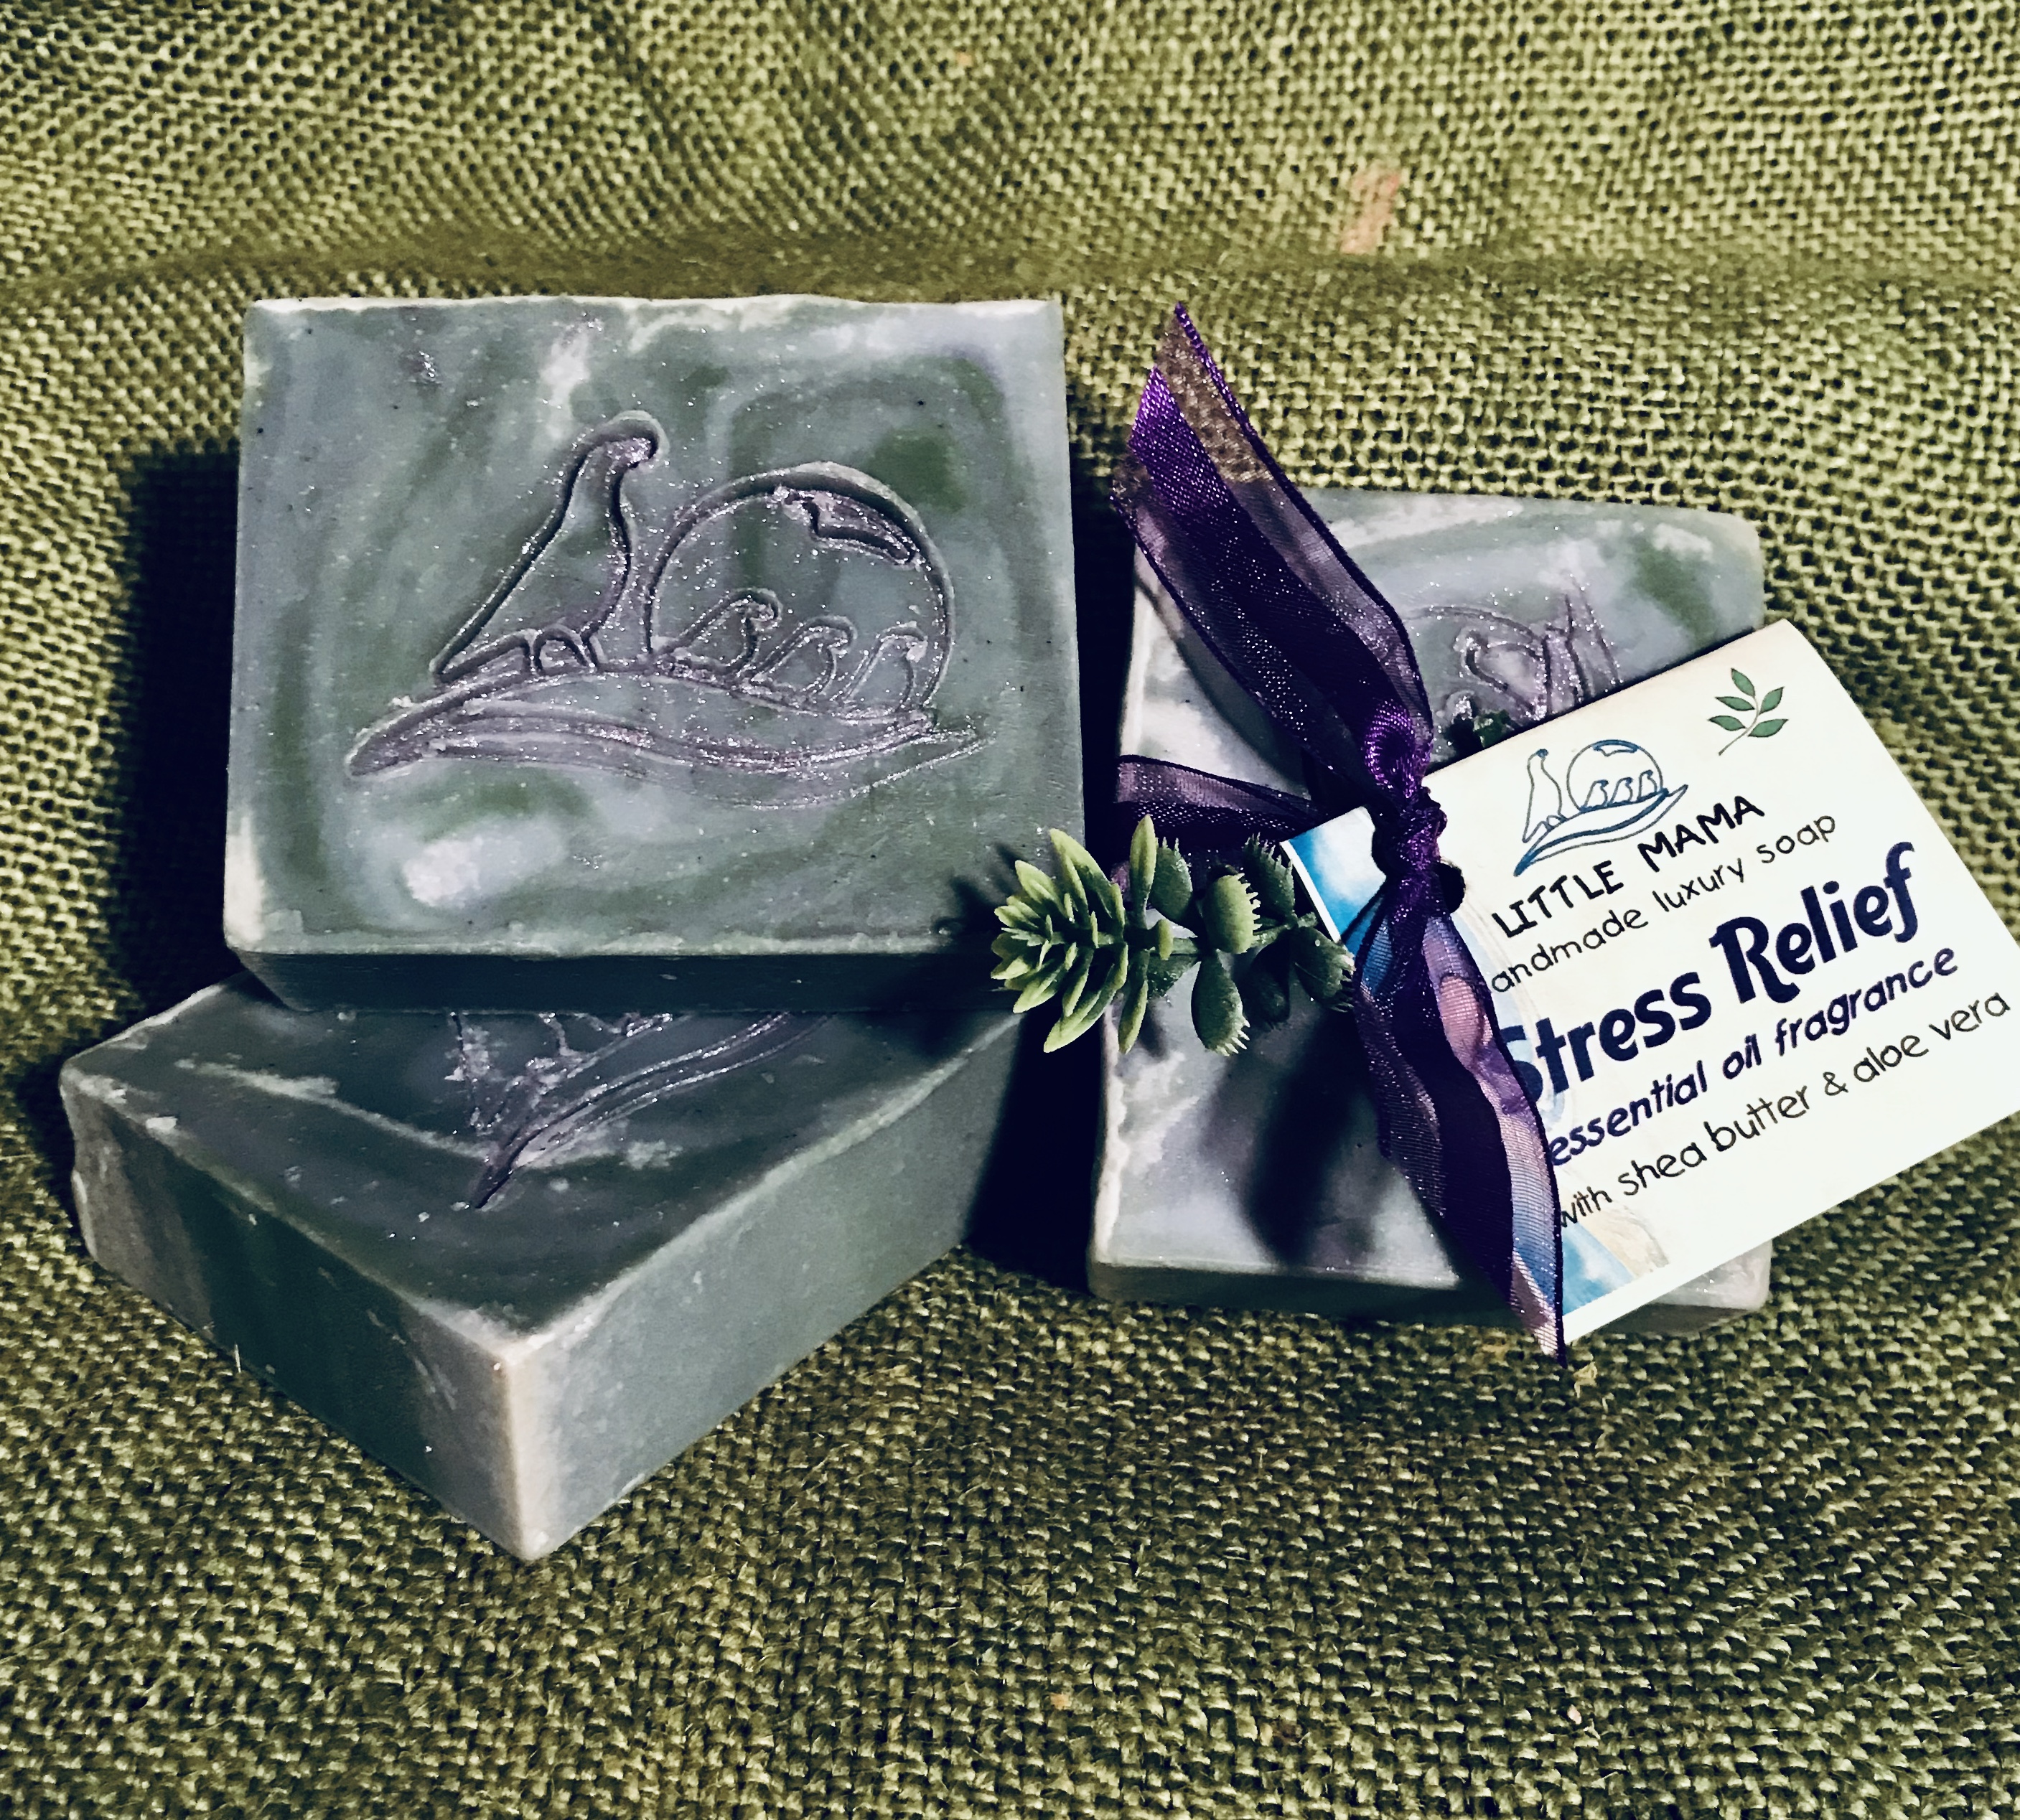 Stress Relief Soap